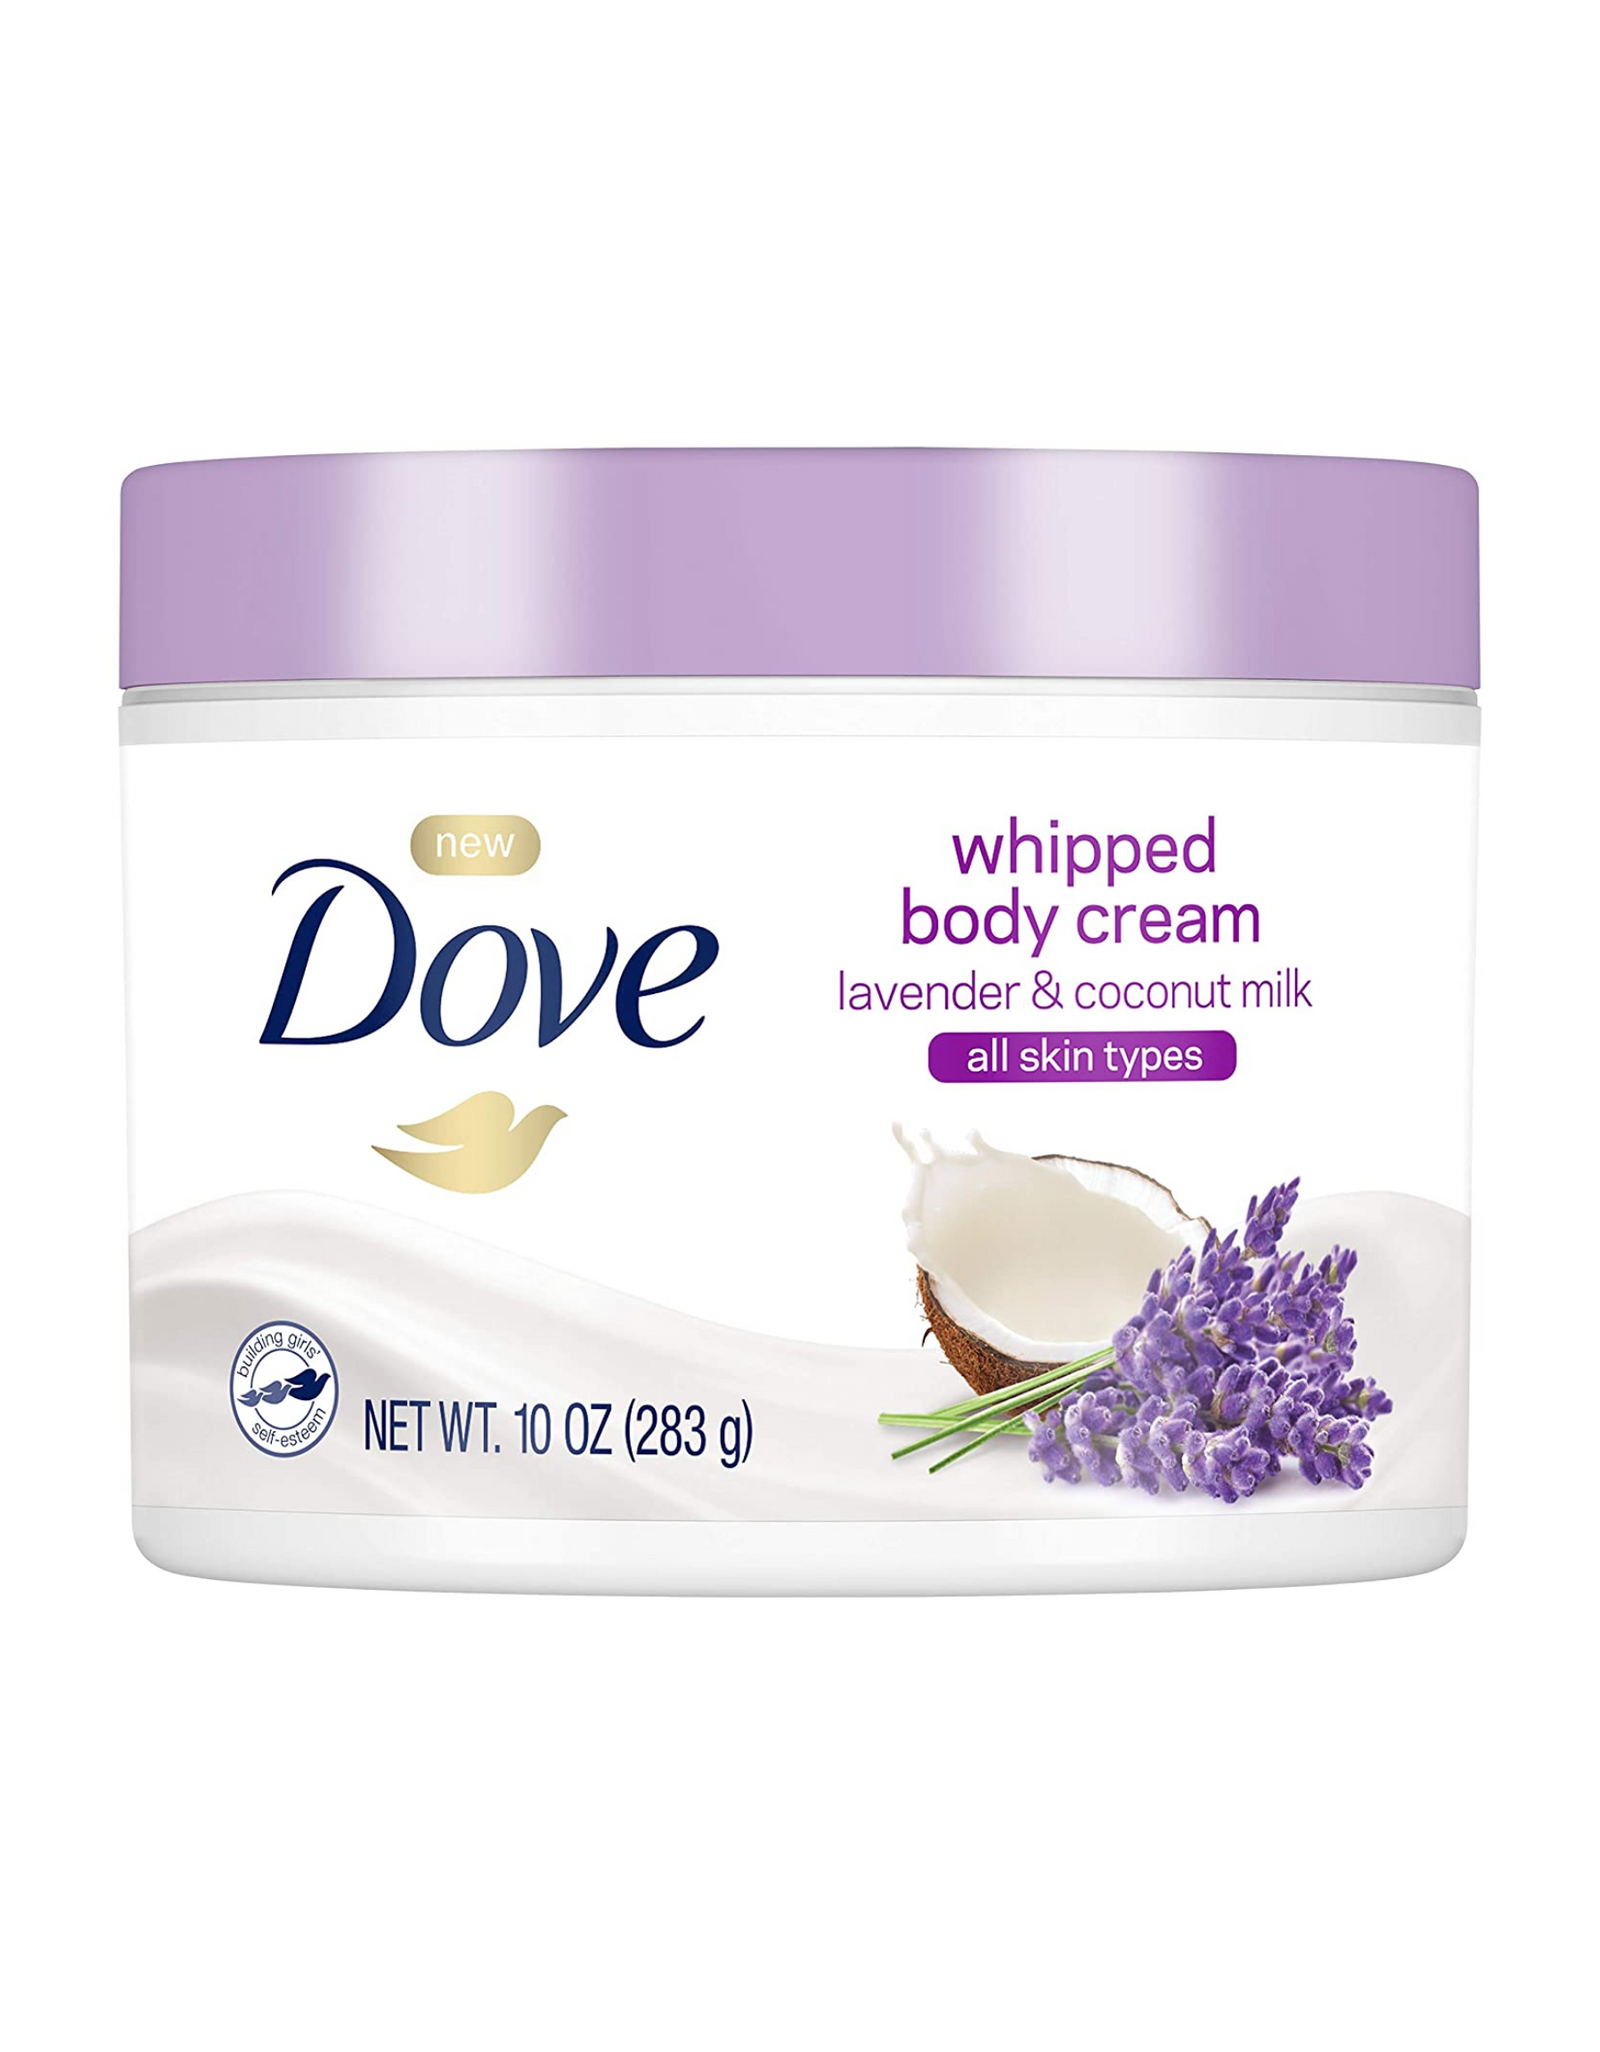 Dove Whipped Lavender and Coconut Milk Body Cream, for All Skin Types, 10 oz